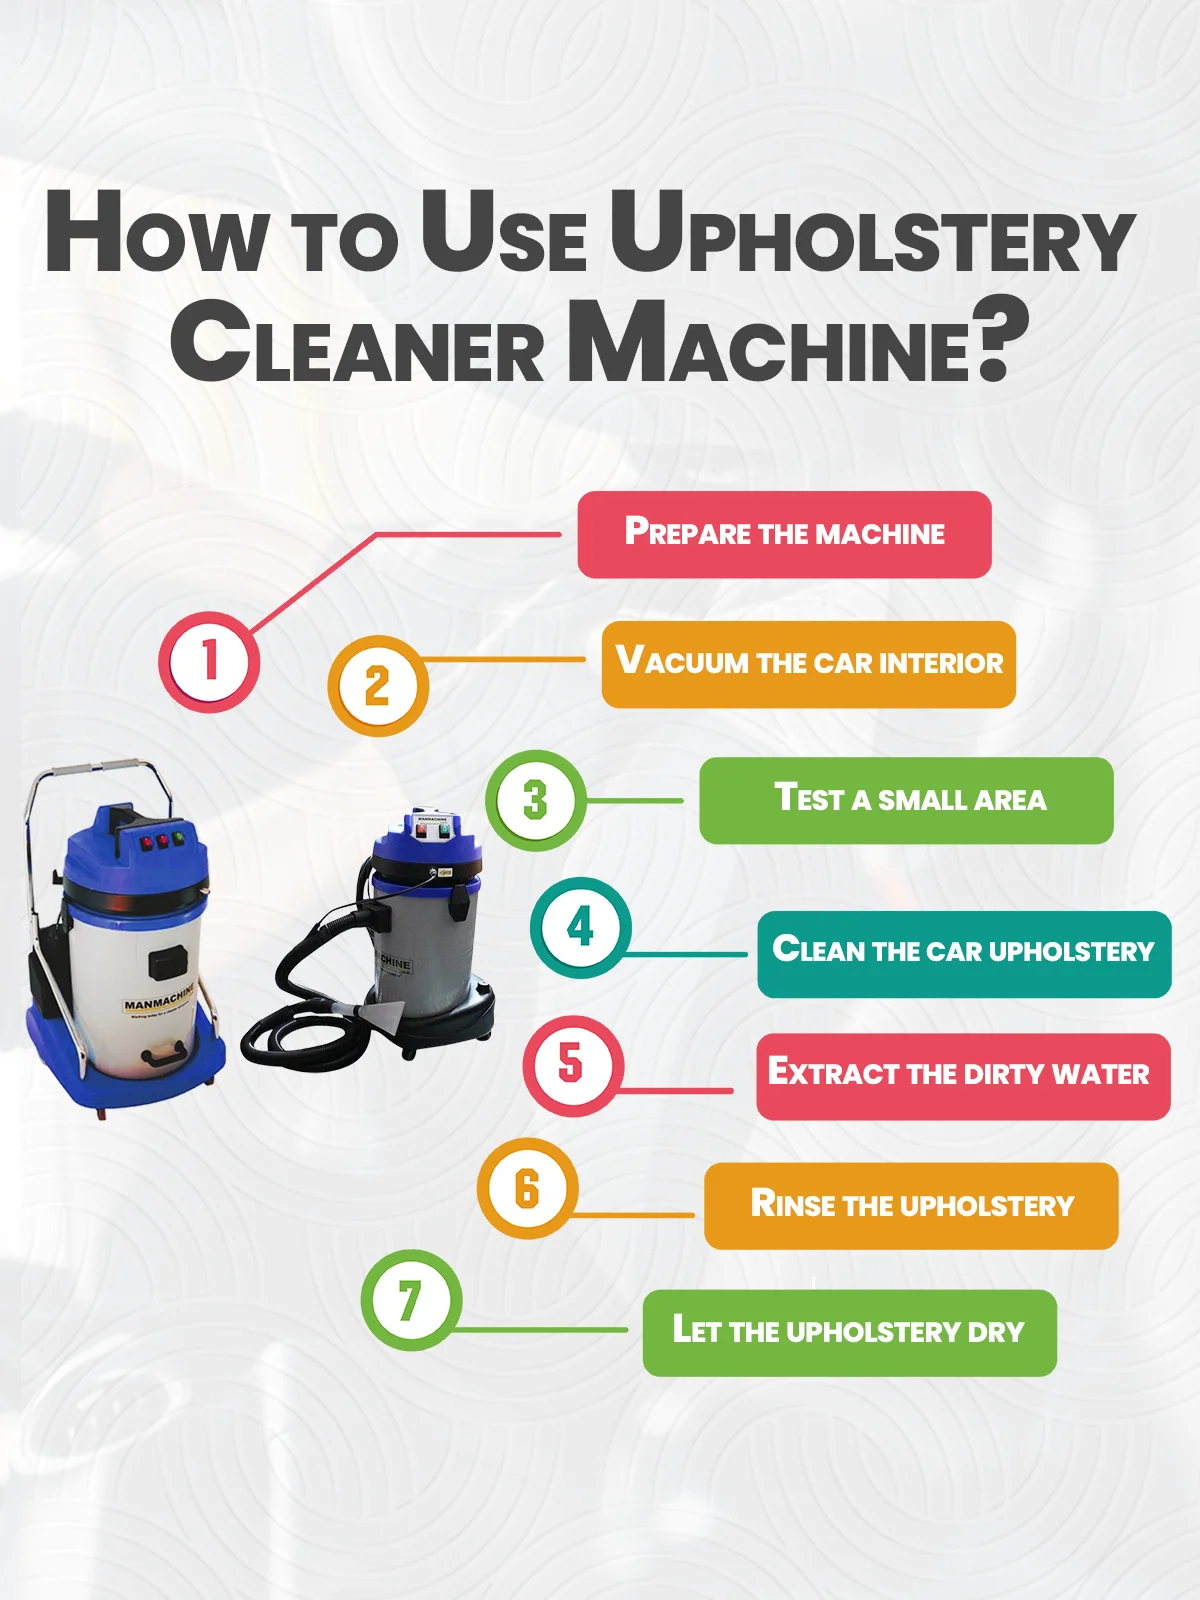 Follow step-by-step guide on how to use a Car upholstery cleaner machine effectively